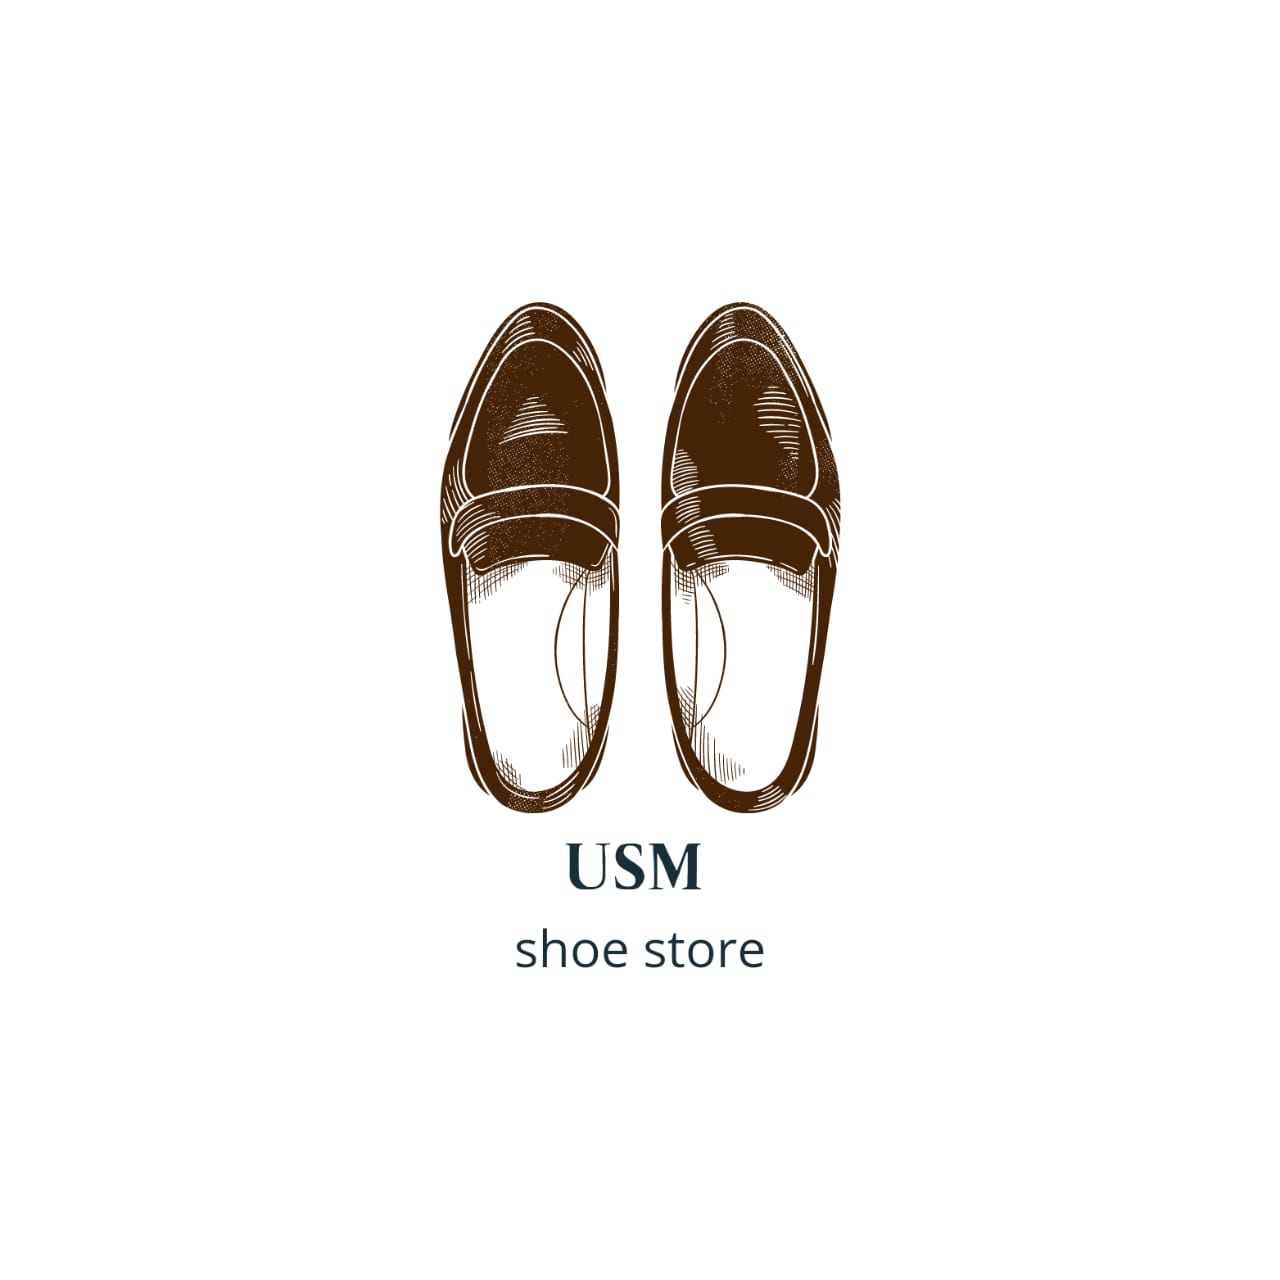 Pair of shoes with the words usm above them.